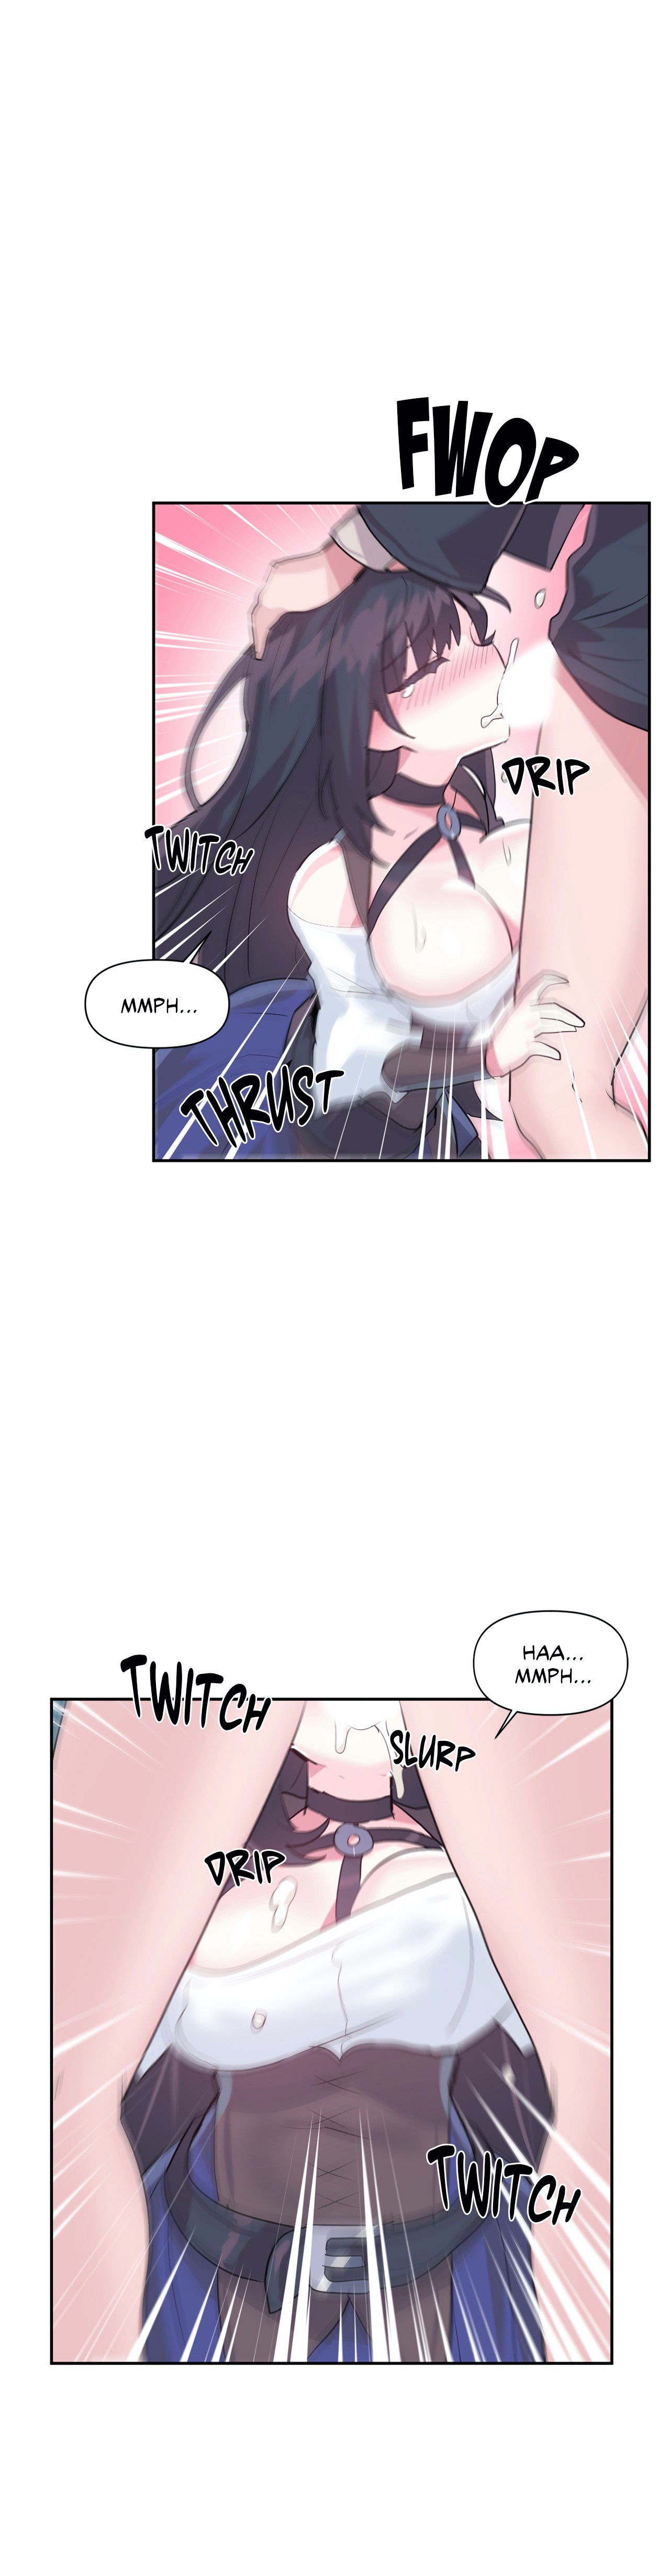 log-in-to-lust-a-land-chap-34-26